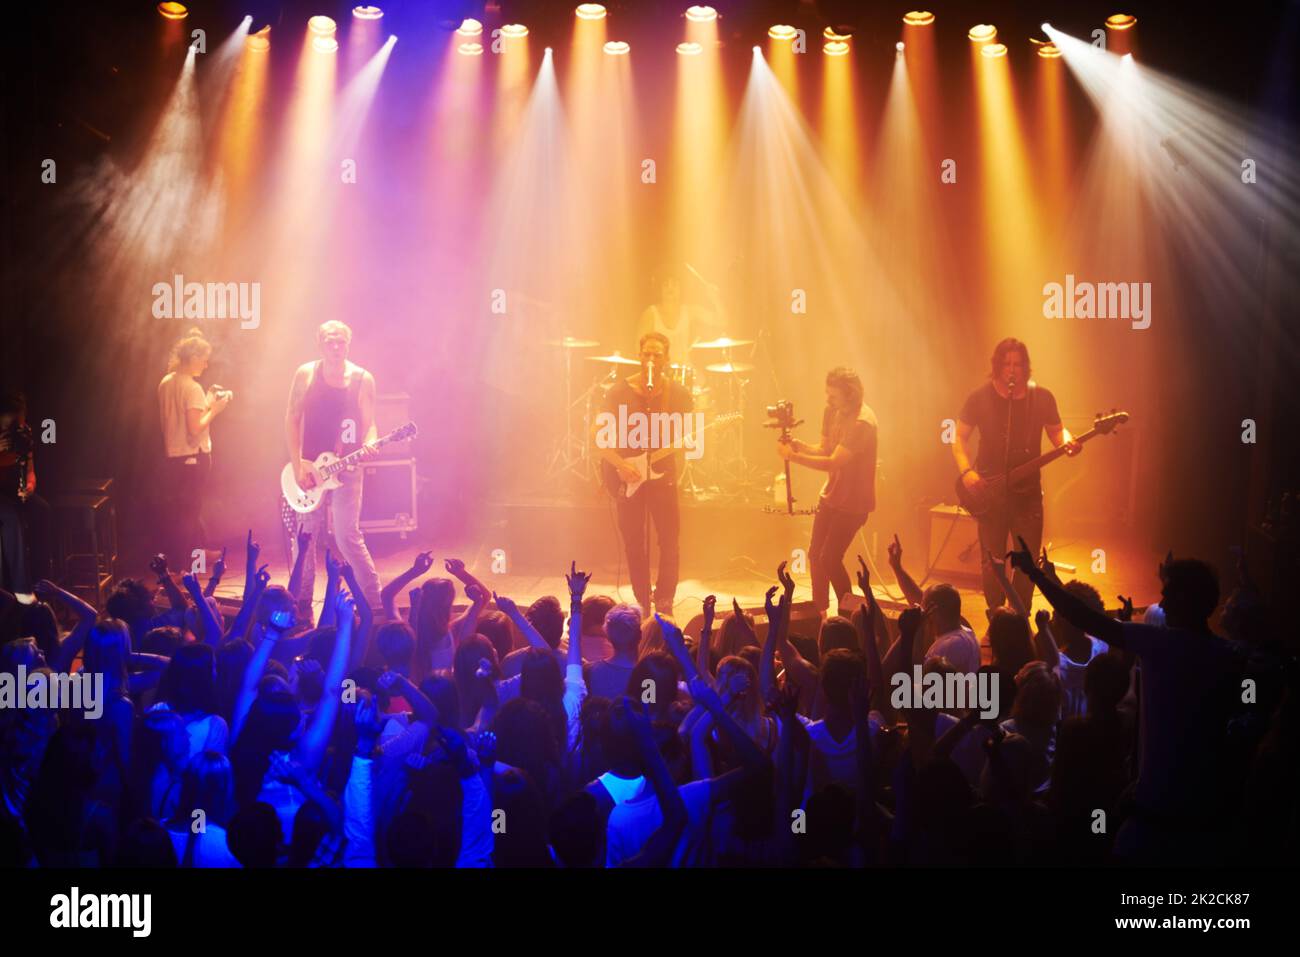 Shot of a large crowd at a music concert-This concert was created for the sole purpose of this photo shoot, featuring 300 models and 3 live bands. All people in this shoot are model released Stock Photo